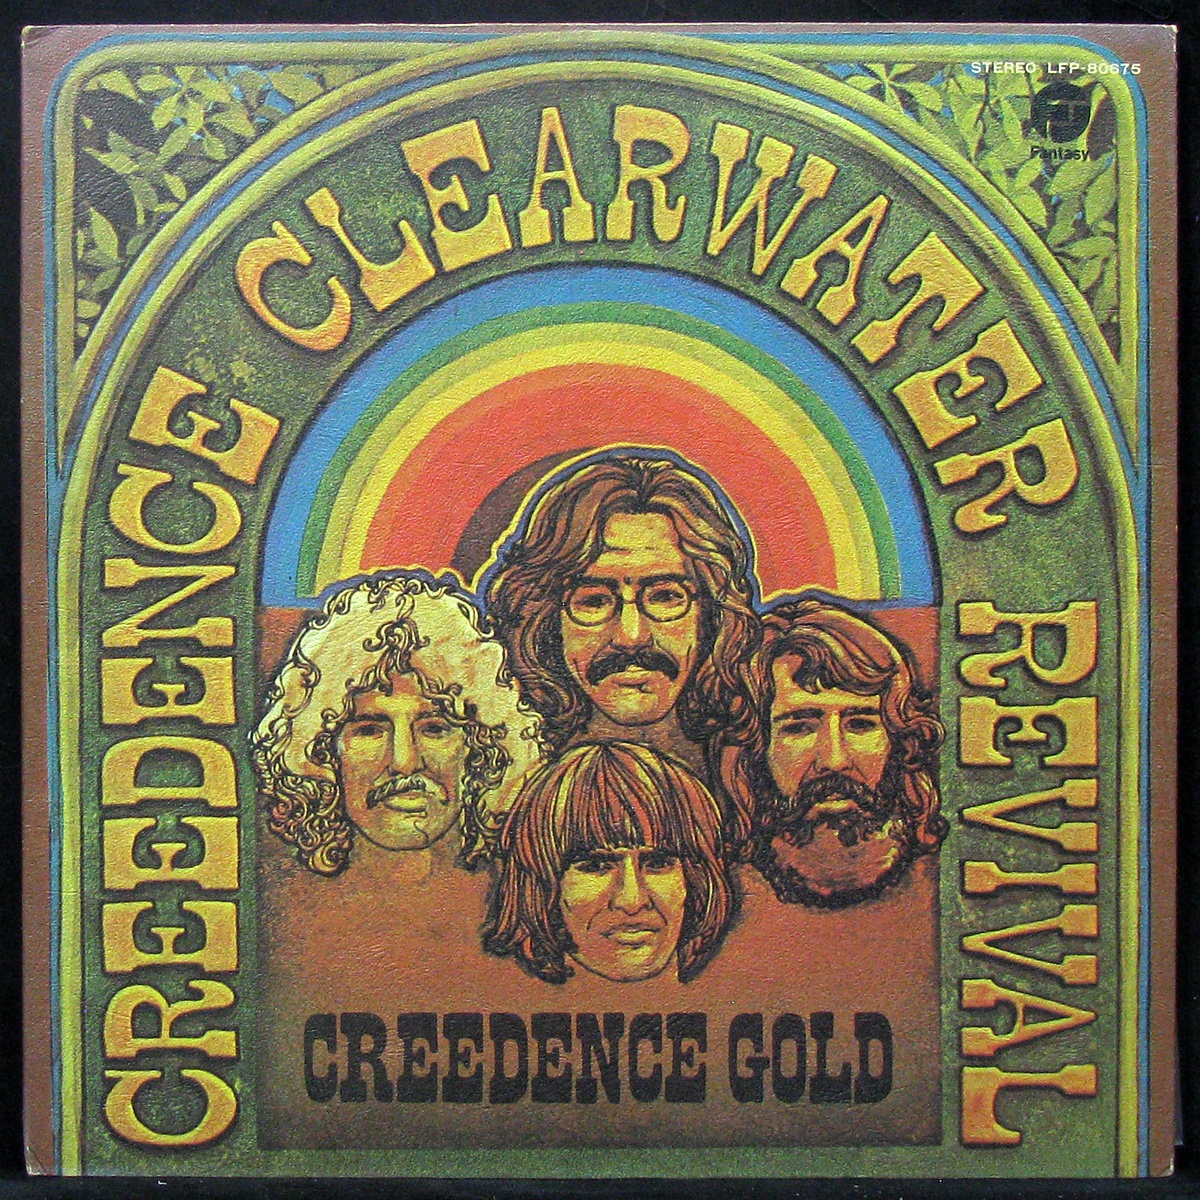 LP Creedence Clearwater Revival — Creedence Gold (+ booklet) фото